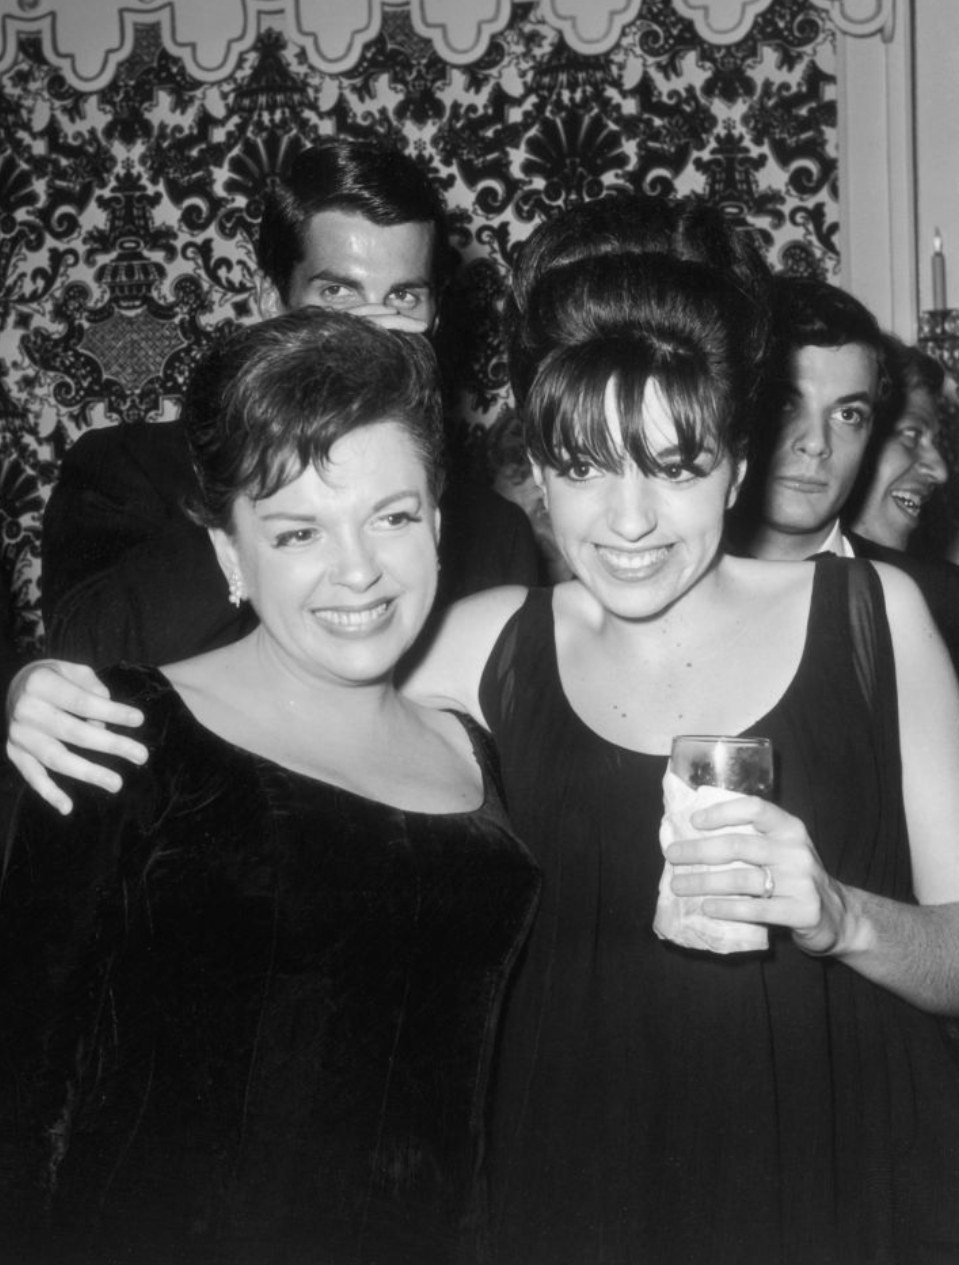 Minnelli and Garland posing together backstage in the late 1960s